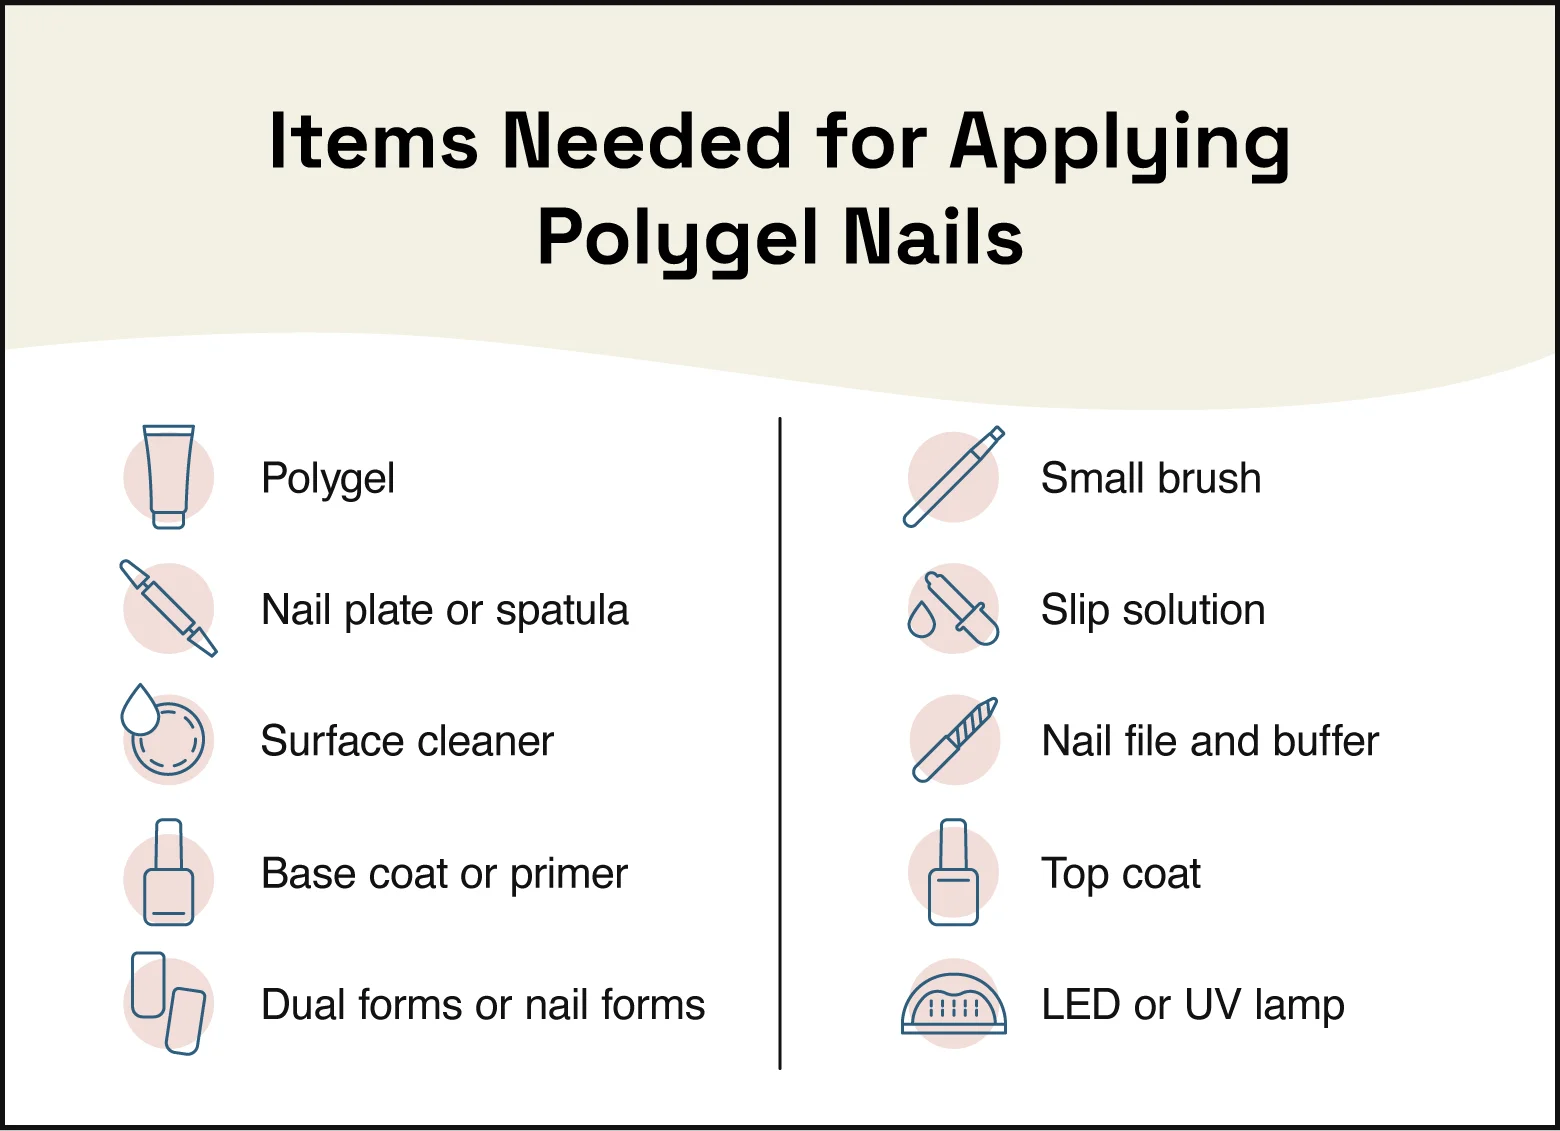 To apply polygel nails, you’ll need poly gel, a nail plate or spatula, surface cleaner, base coat or primer, dual forms or nail forms, a small brush, slip solution, a nail file, a nail buffer, top coat, and an LED or UV lamp.